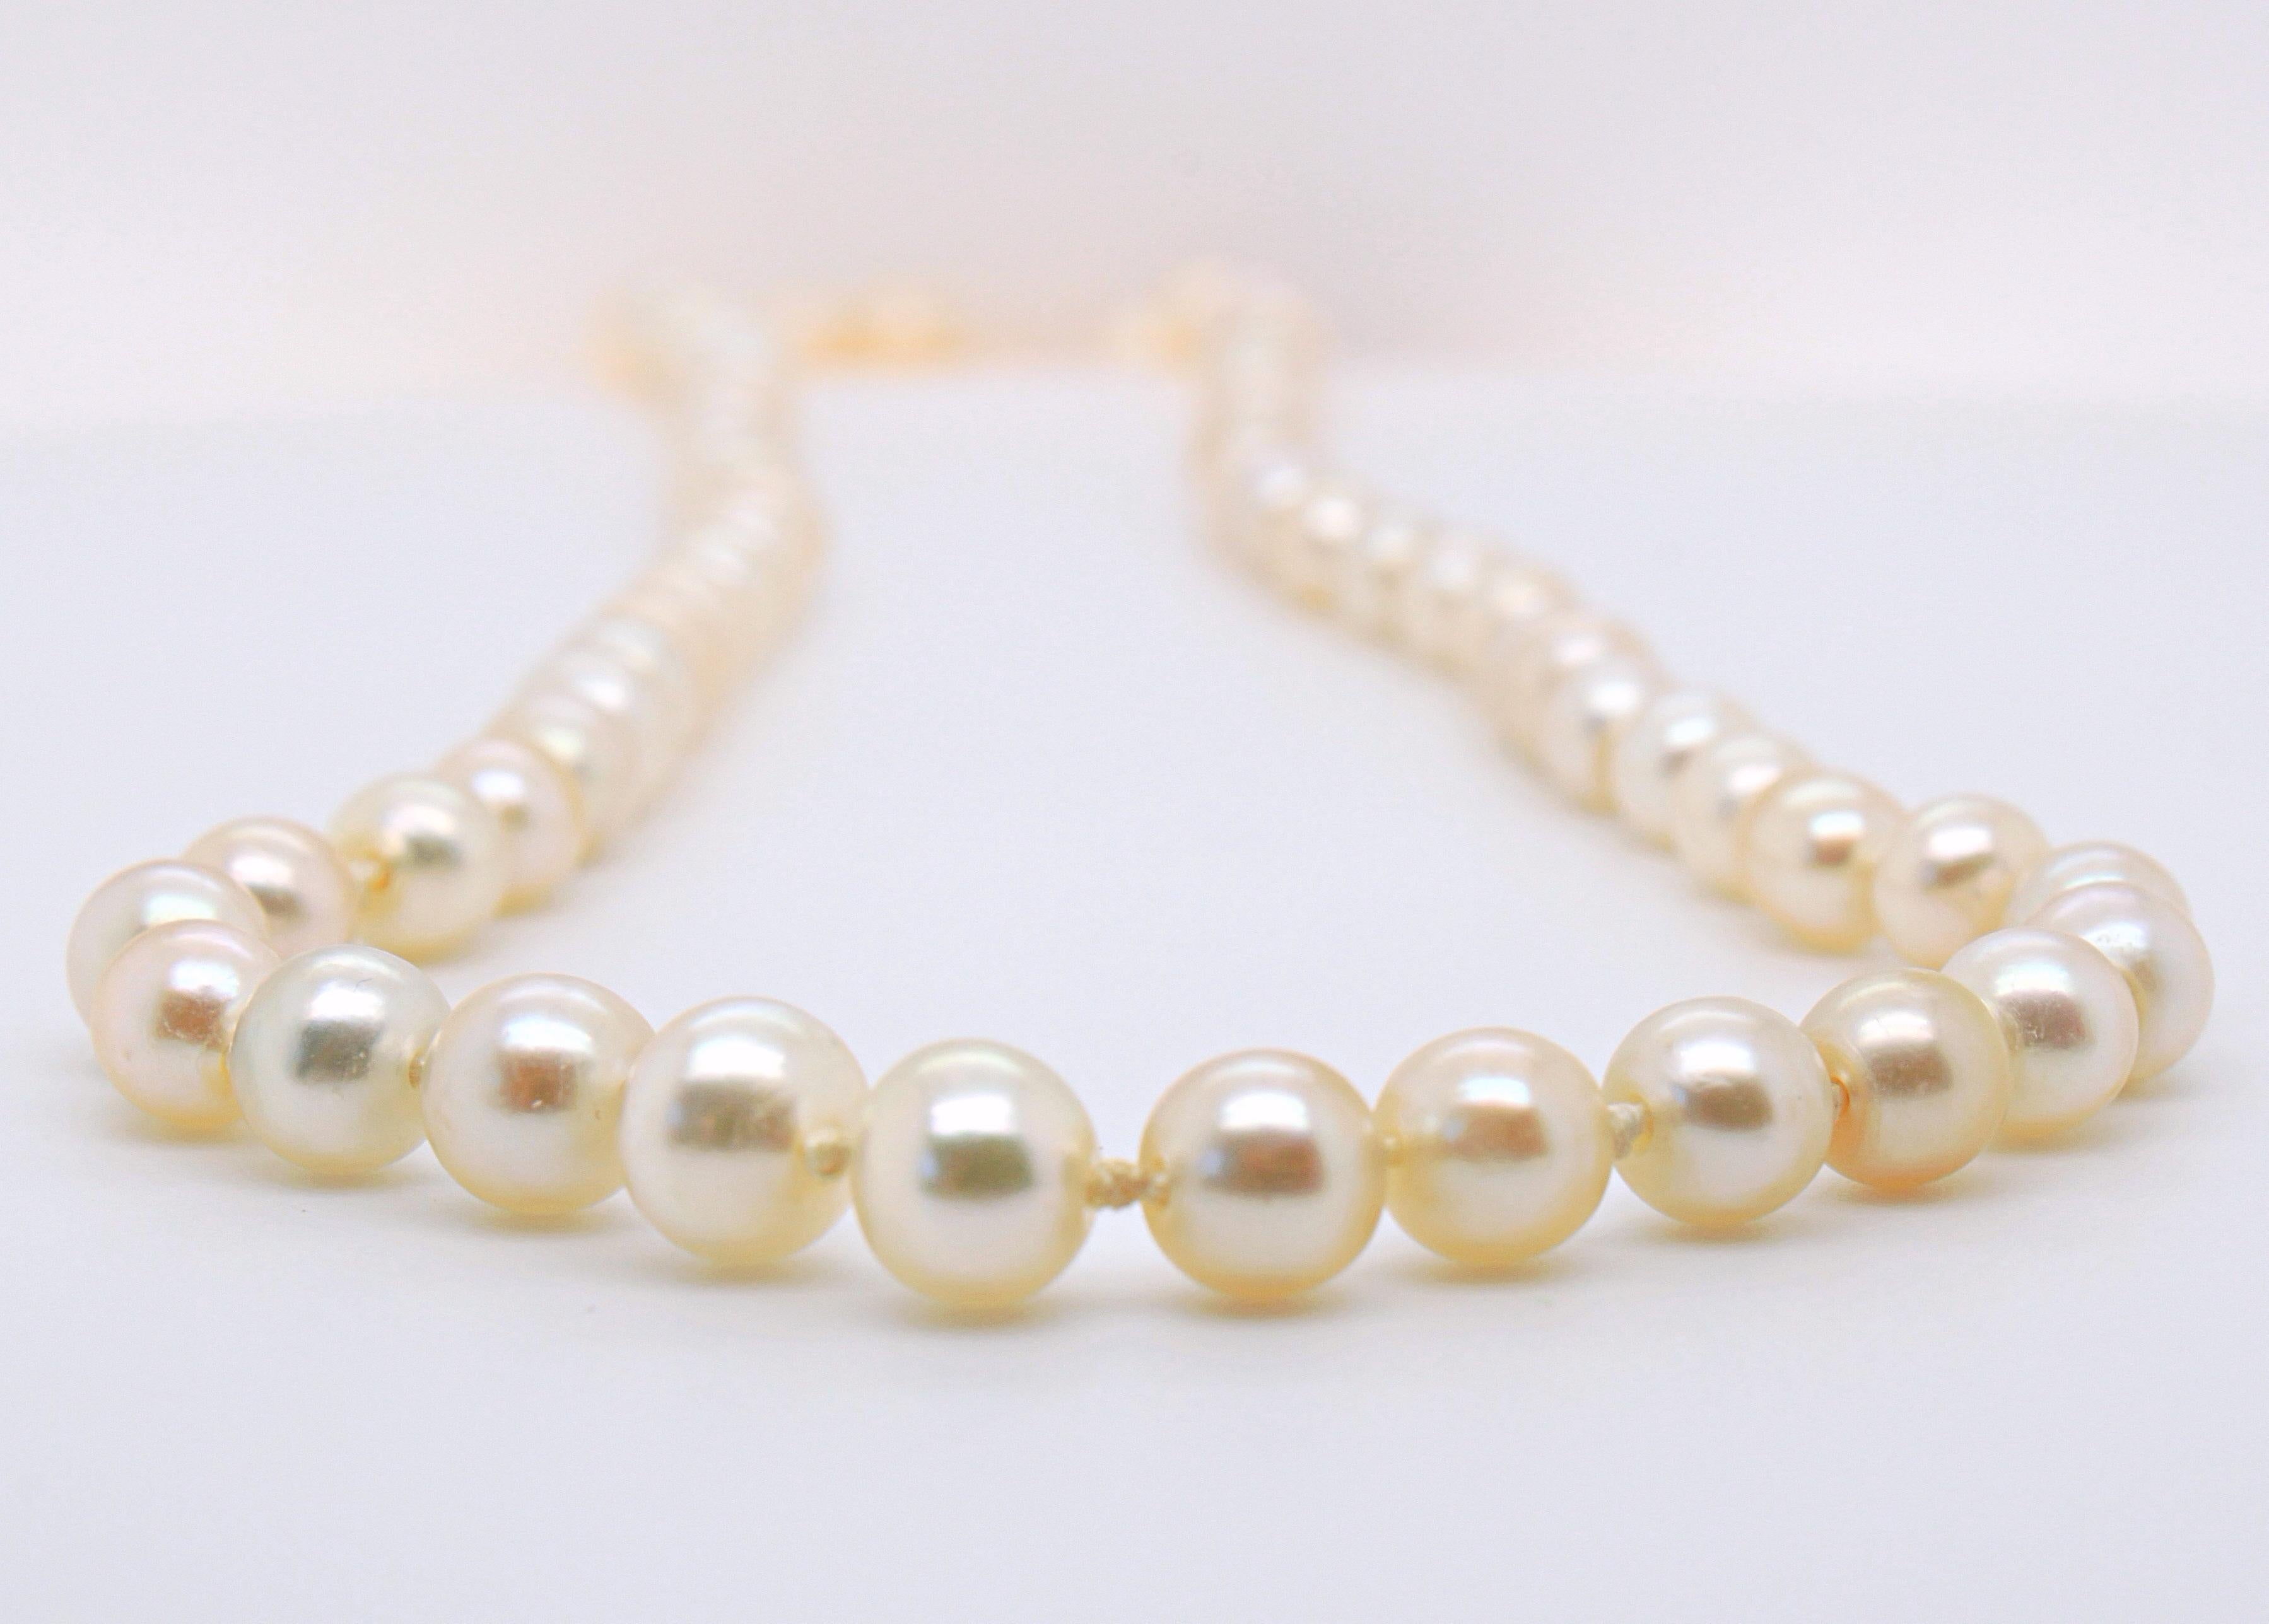 A natural saltwater pearl necklace with a diamond clasp, ca. 1920s. The Art Deco pearl necklace consists of 100 natural saltwater pearls ranging from 2.15mm - 5.35mm - accompanied by a gemological certificate. The pearls have an excellent lustre and